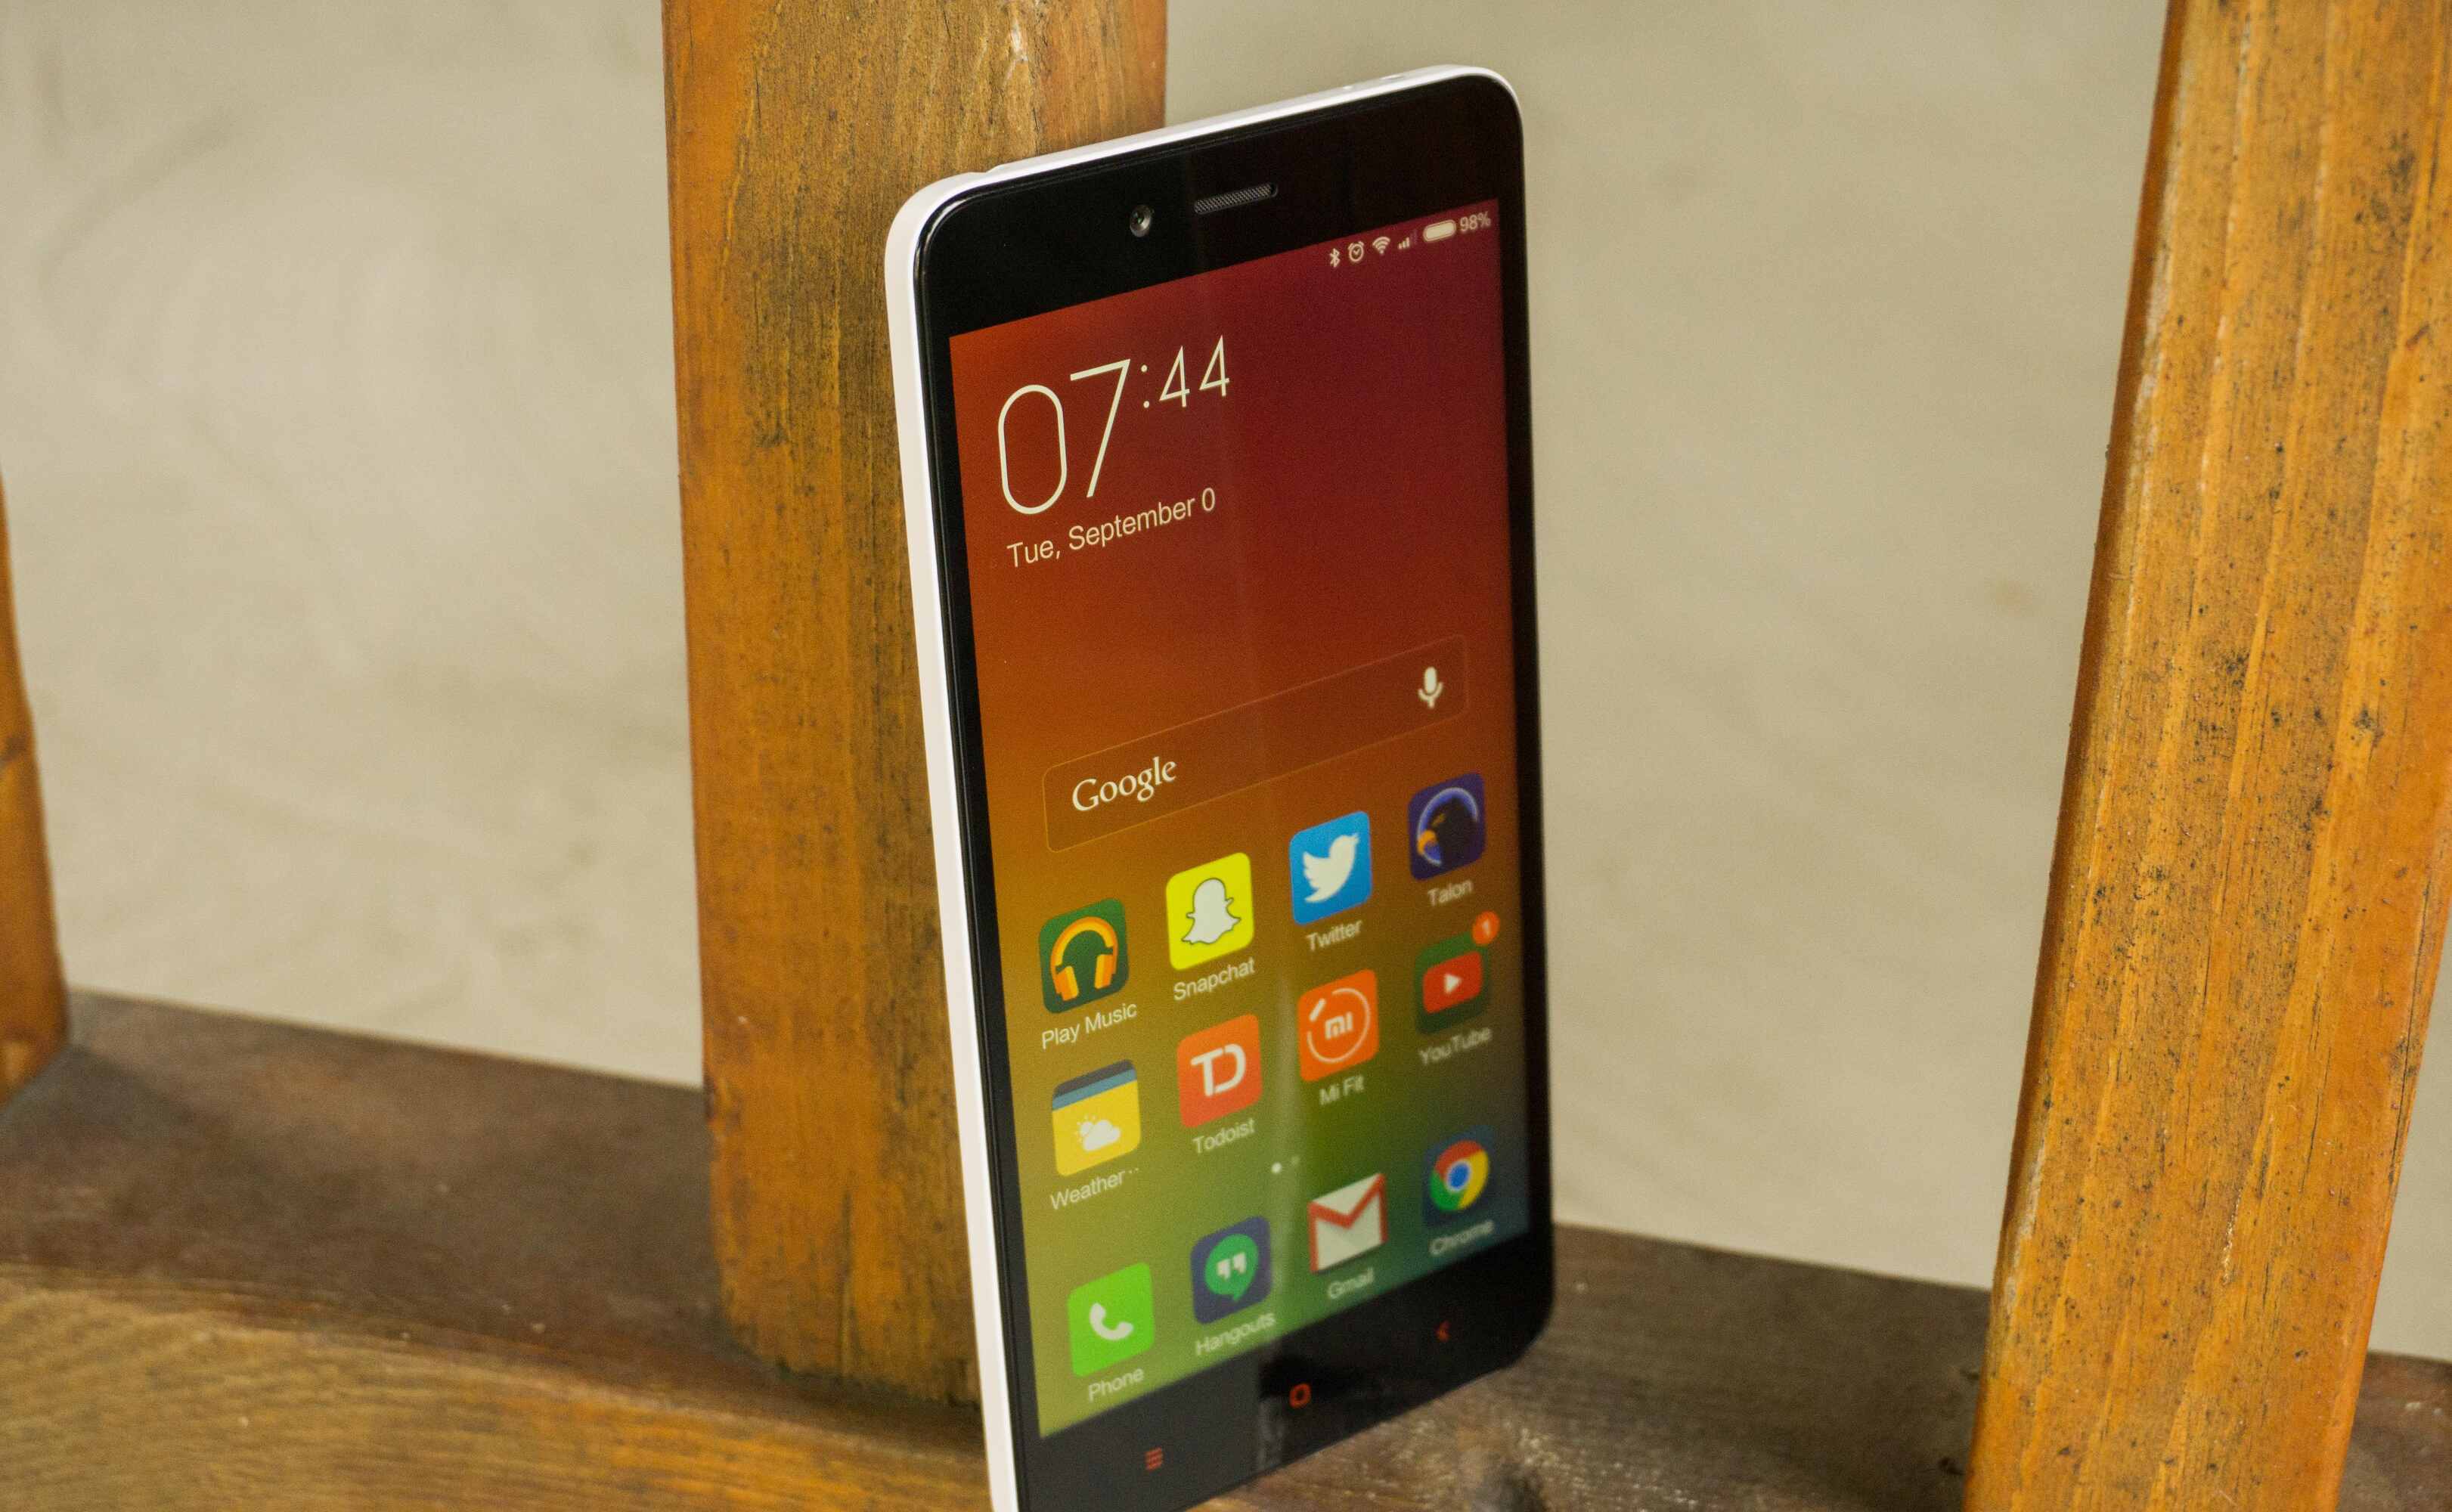 xiaomi-redmi-note-2-overview-of-available-services